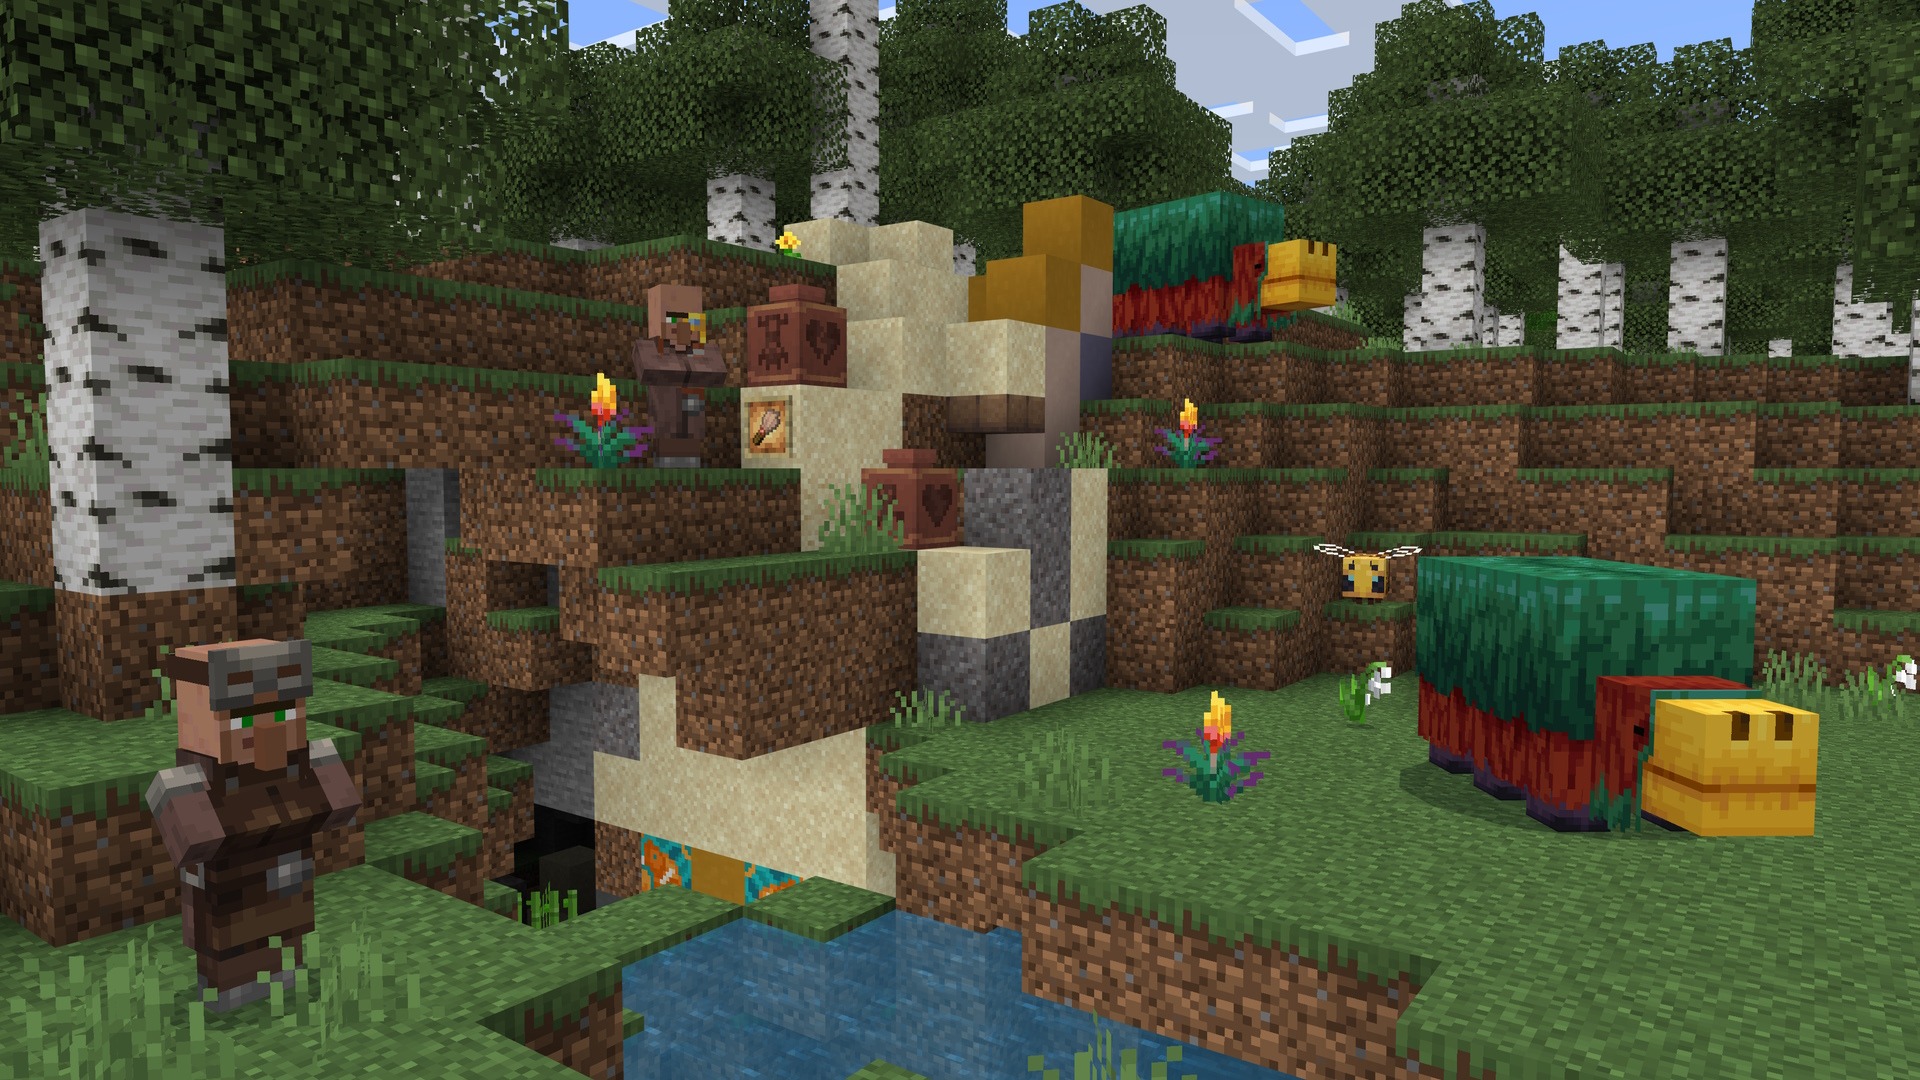 A Minecraft screenshot featuring a Trail Ruins structure, decorated pots, sniffers, , villagers, and torchflowers.